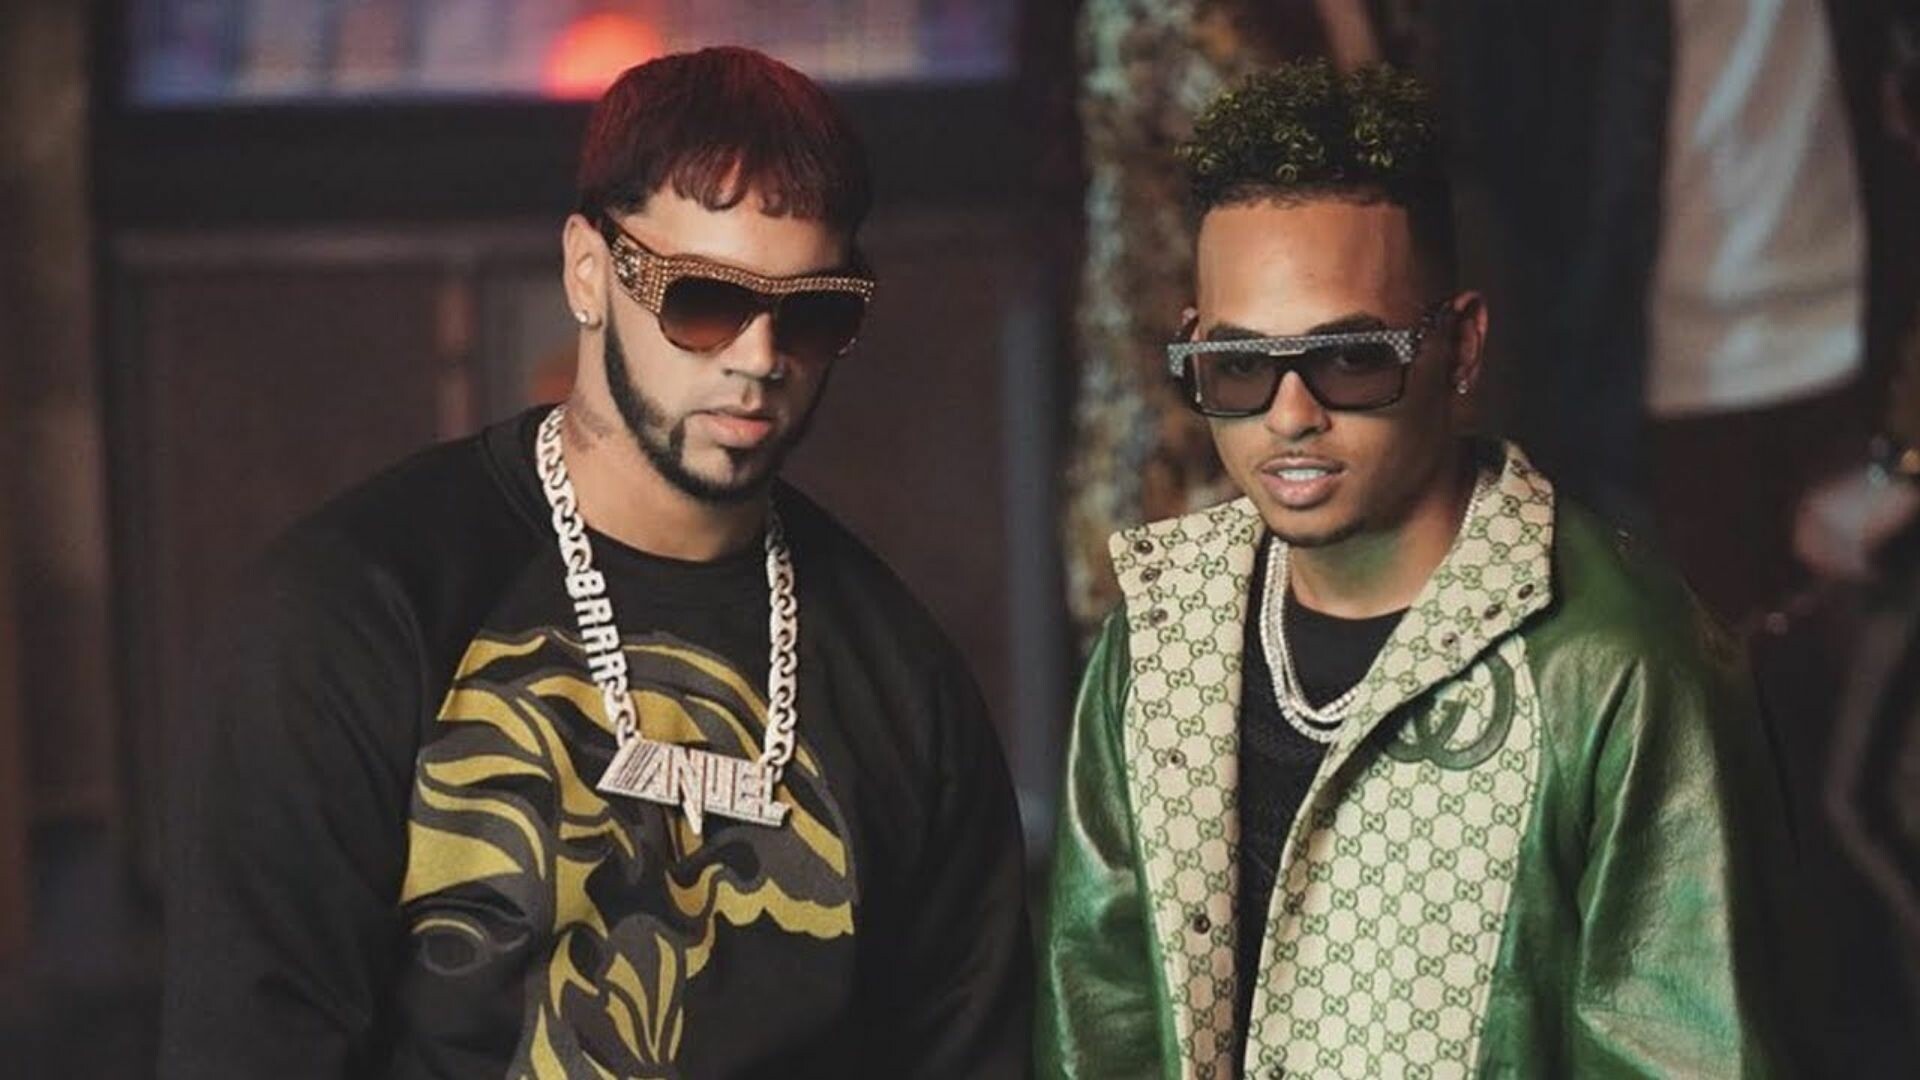 Ozuna: Collaboration with Anuel AA, Los Dioses, a 12-track album from the duo. 1920x1080 Full HD Wallpaper.